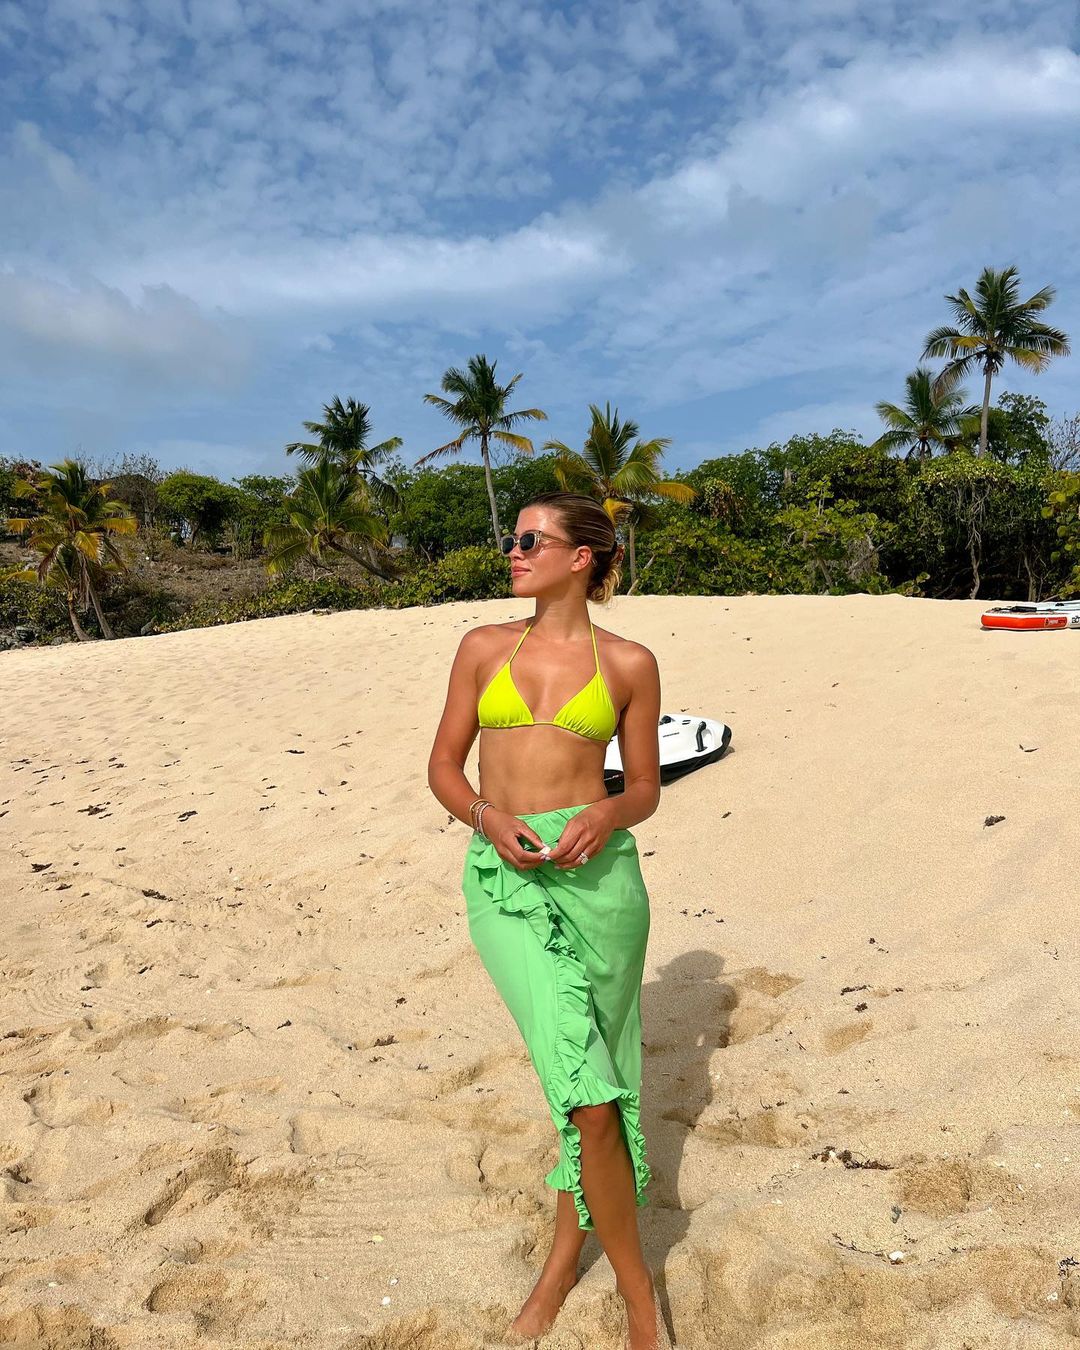 Sofia Richie’s Vacation Continues!